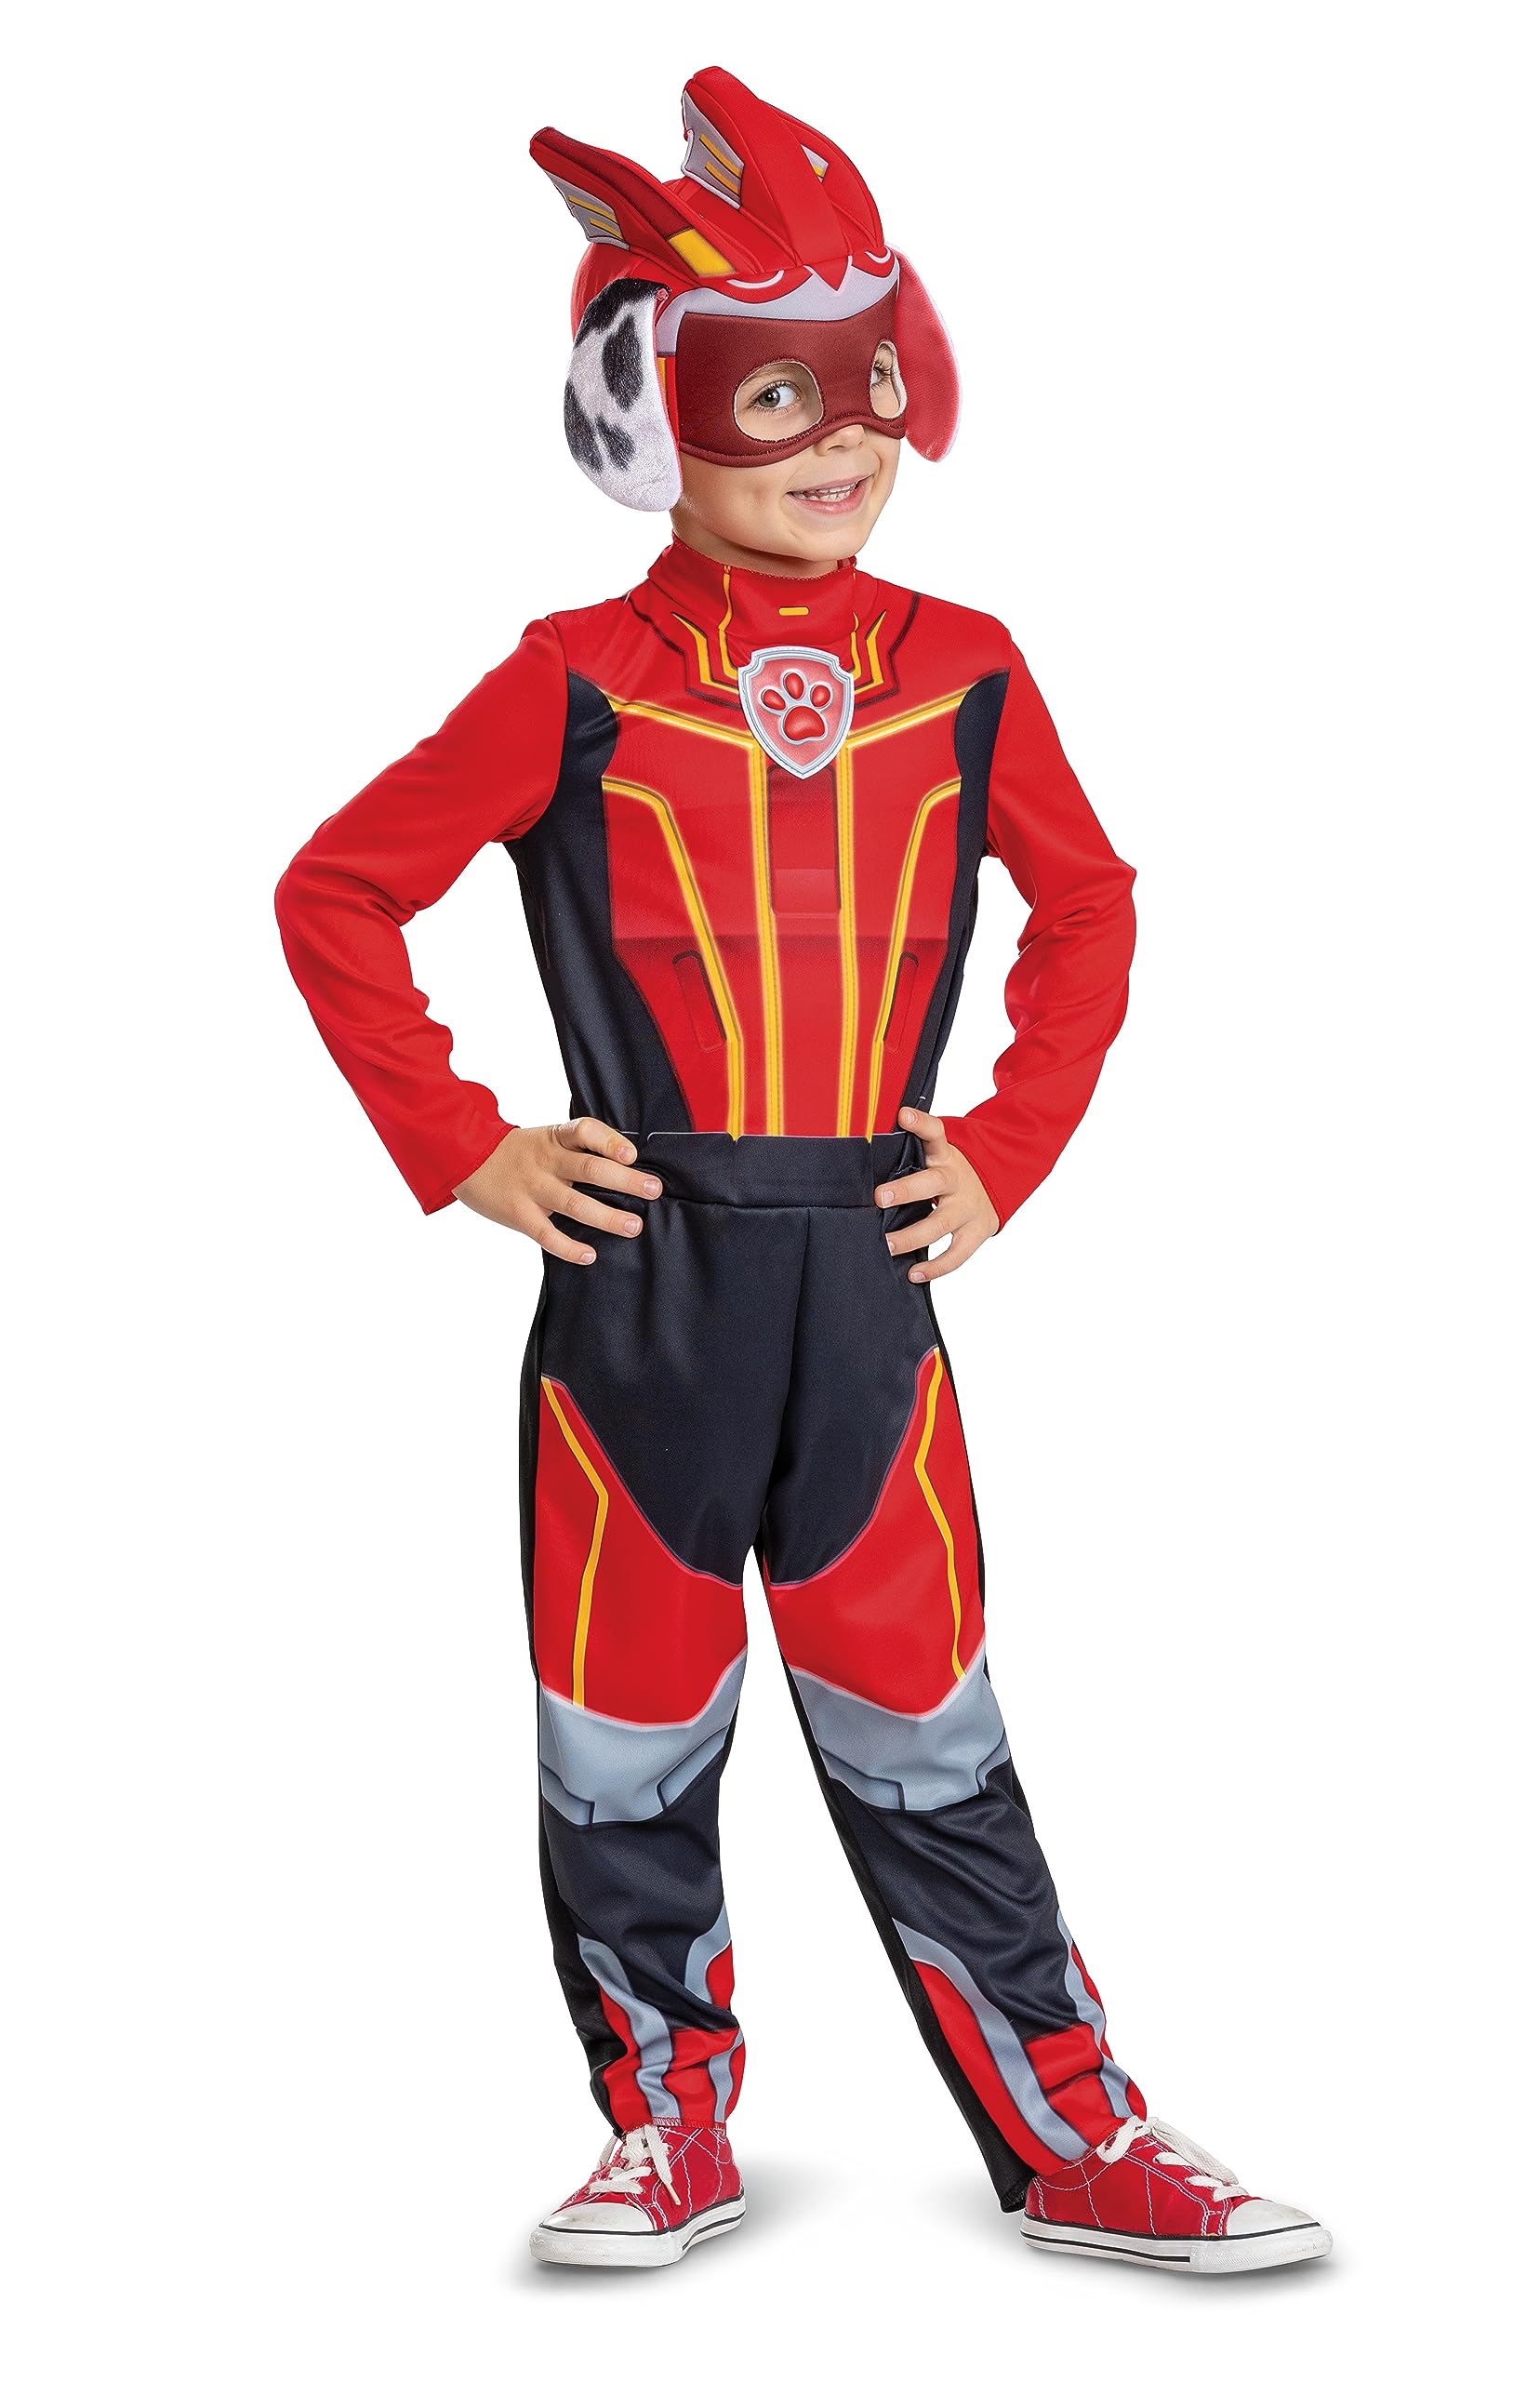 Disguise Marshall Halloween Costume, Official Toddler Paw Patrol Costume Outfit with Headpiece for Kids